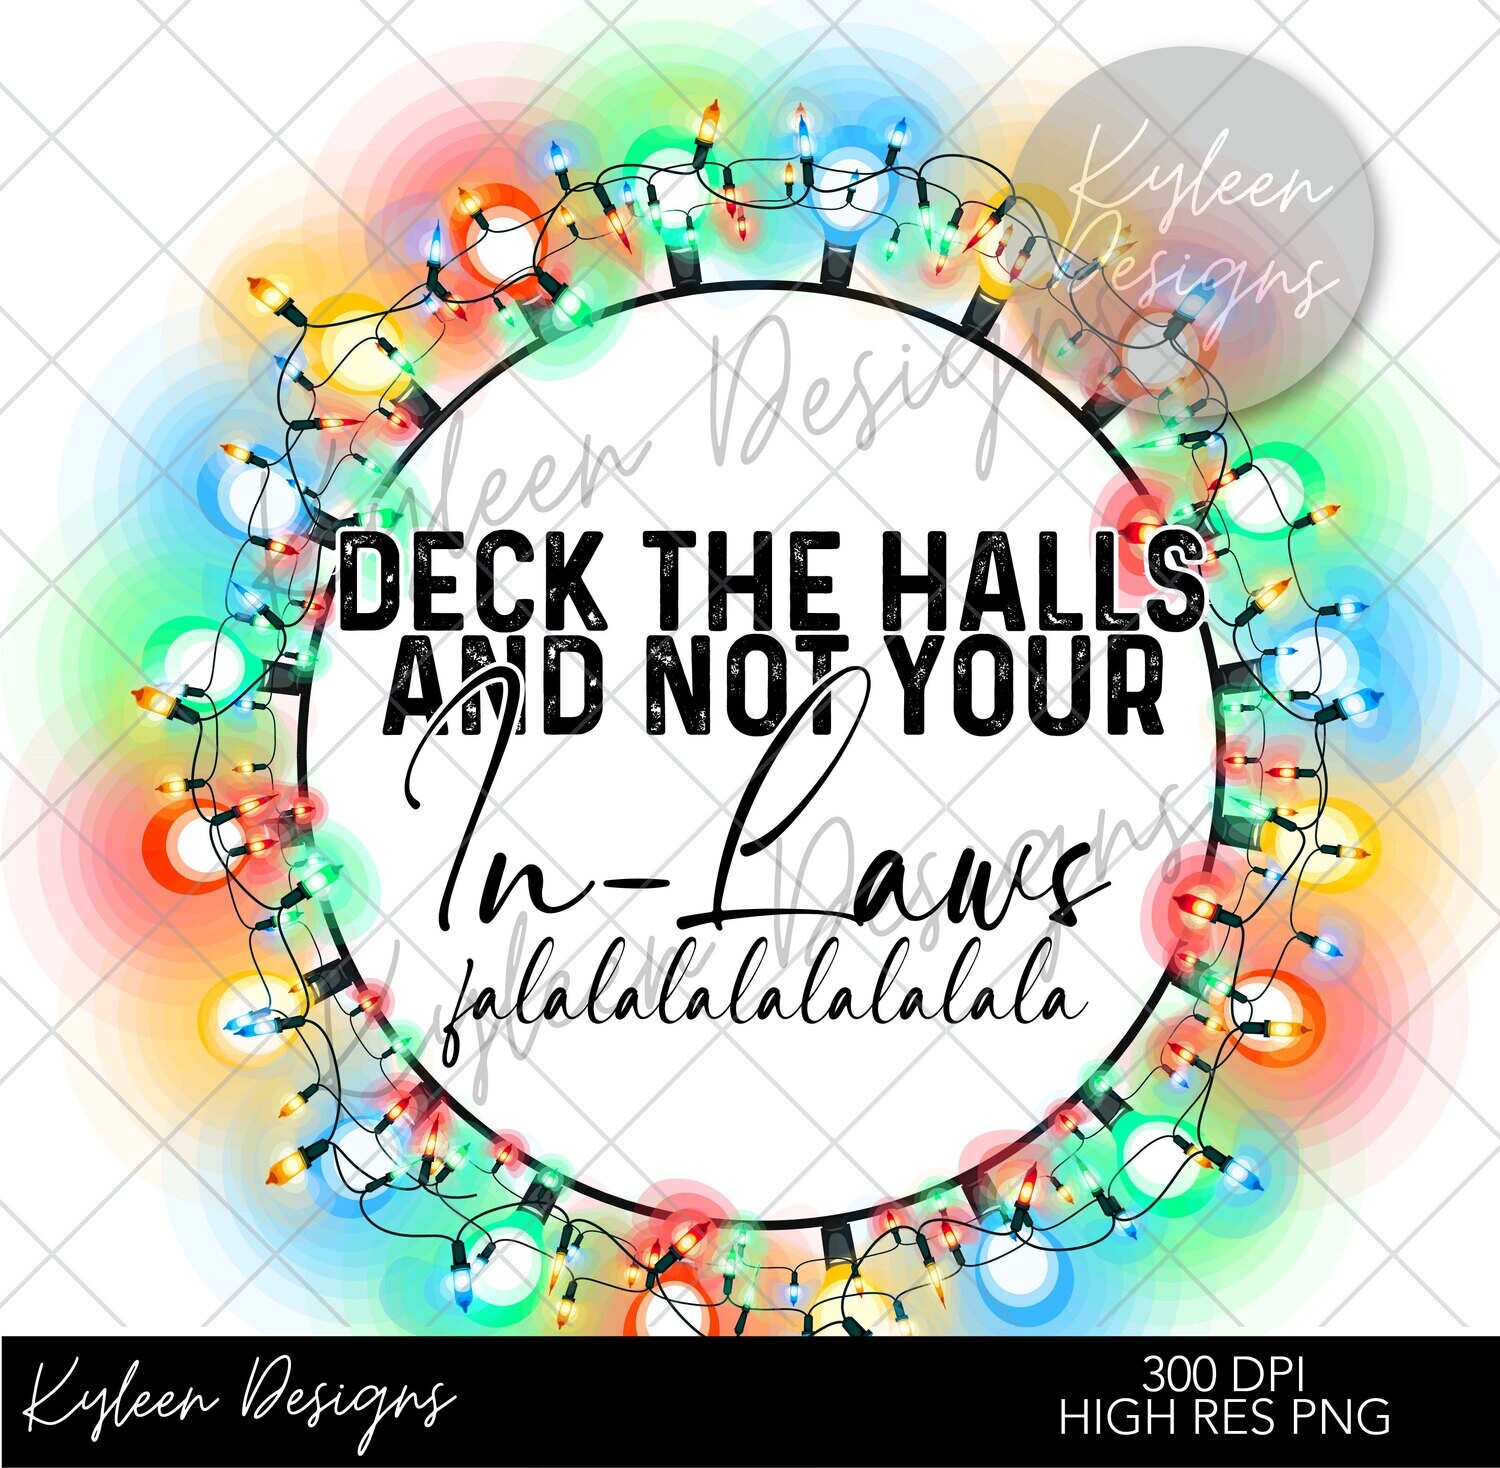 Deck the halls and not your in laws artwork for sublimation, waterslide High res PNG digital file